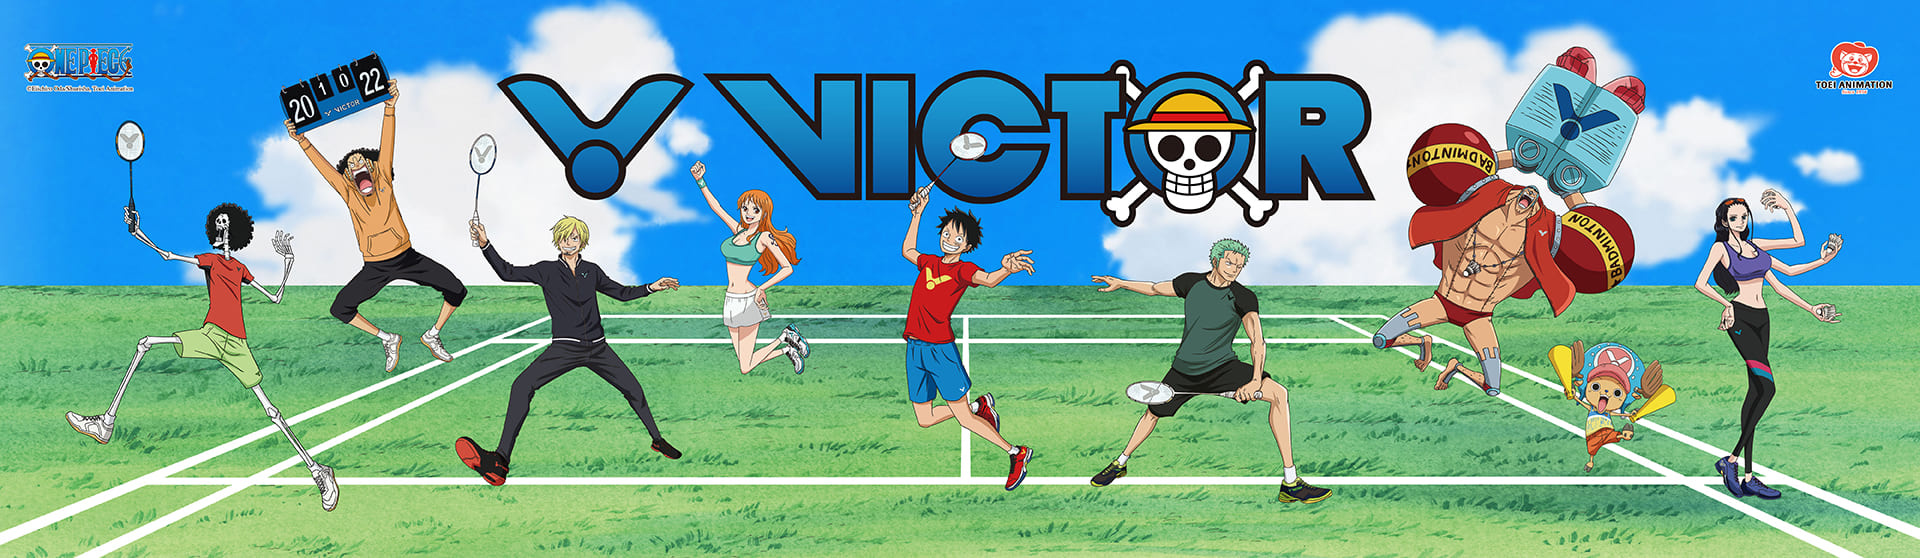 Victor One Piece Badminton Promotion Banner